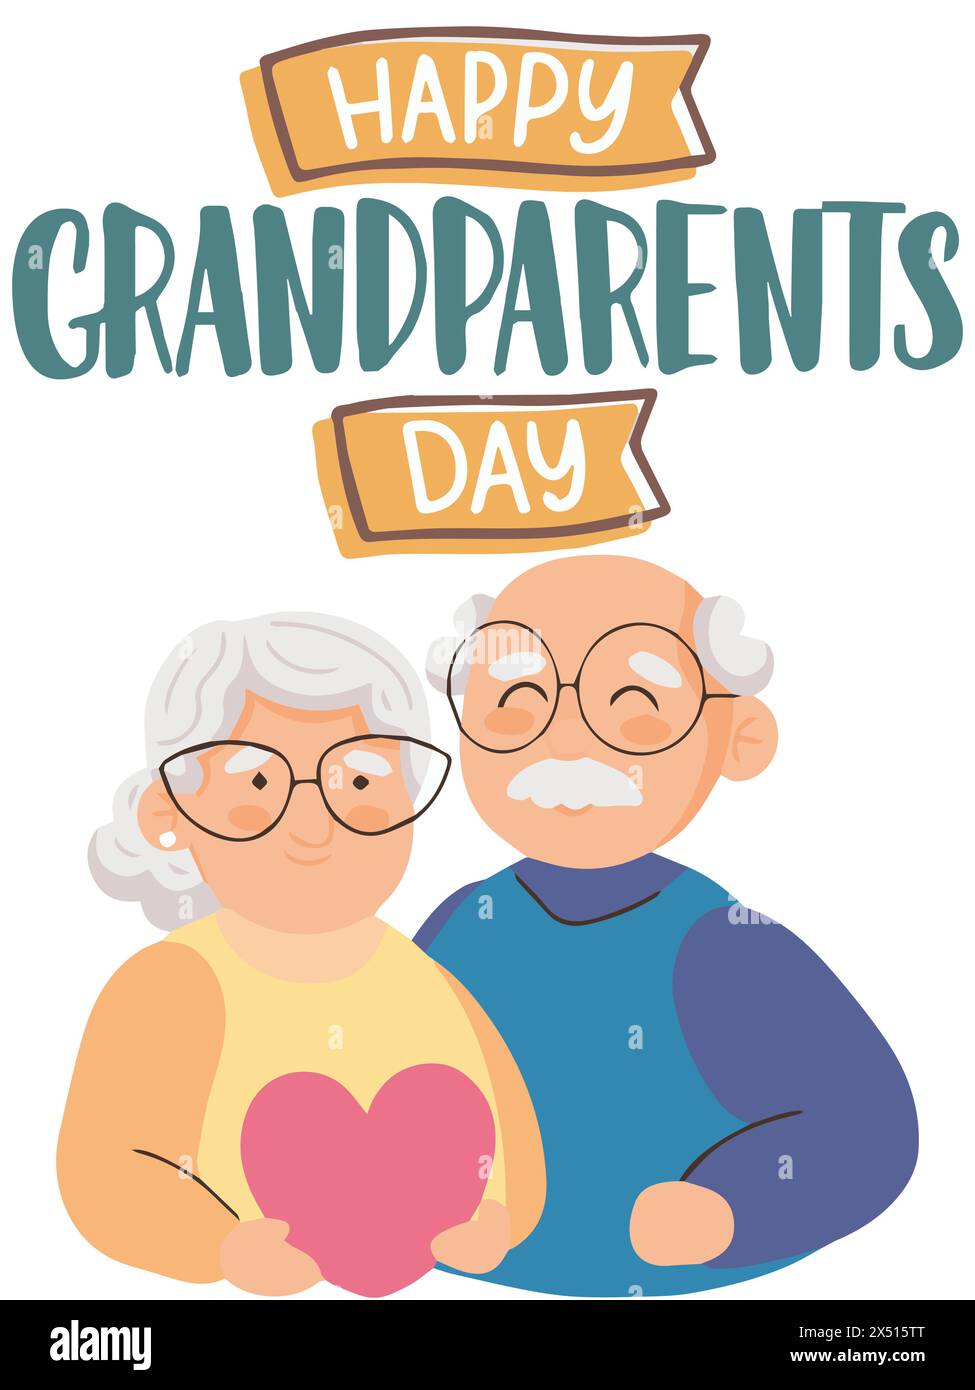 Happy Grandparents Day Cute Cartoon vector Illustration with Older Couple, Heart in hand. Stock Vector